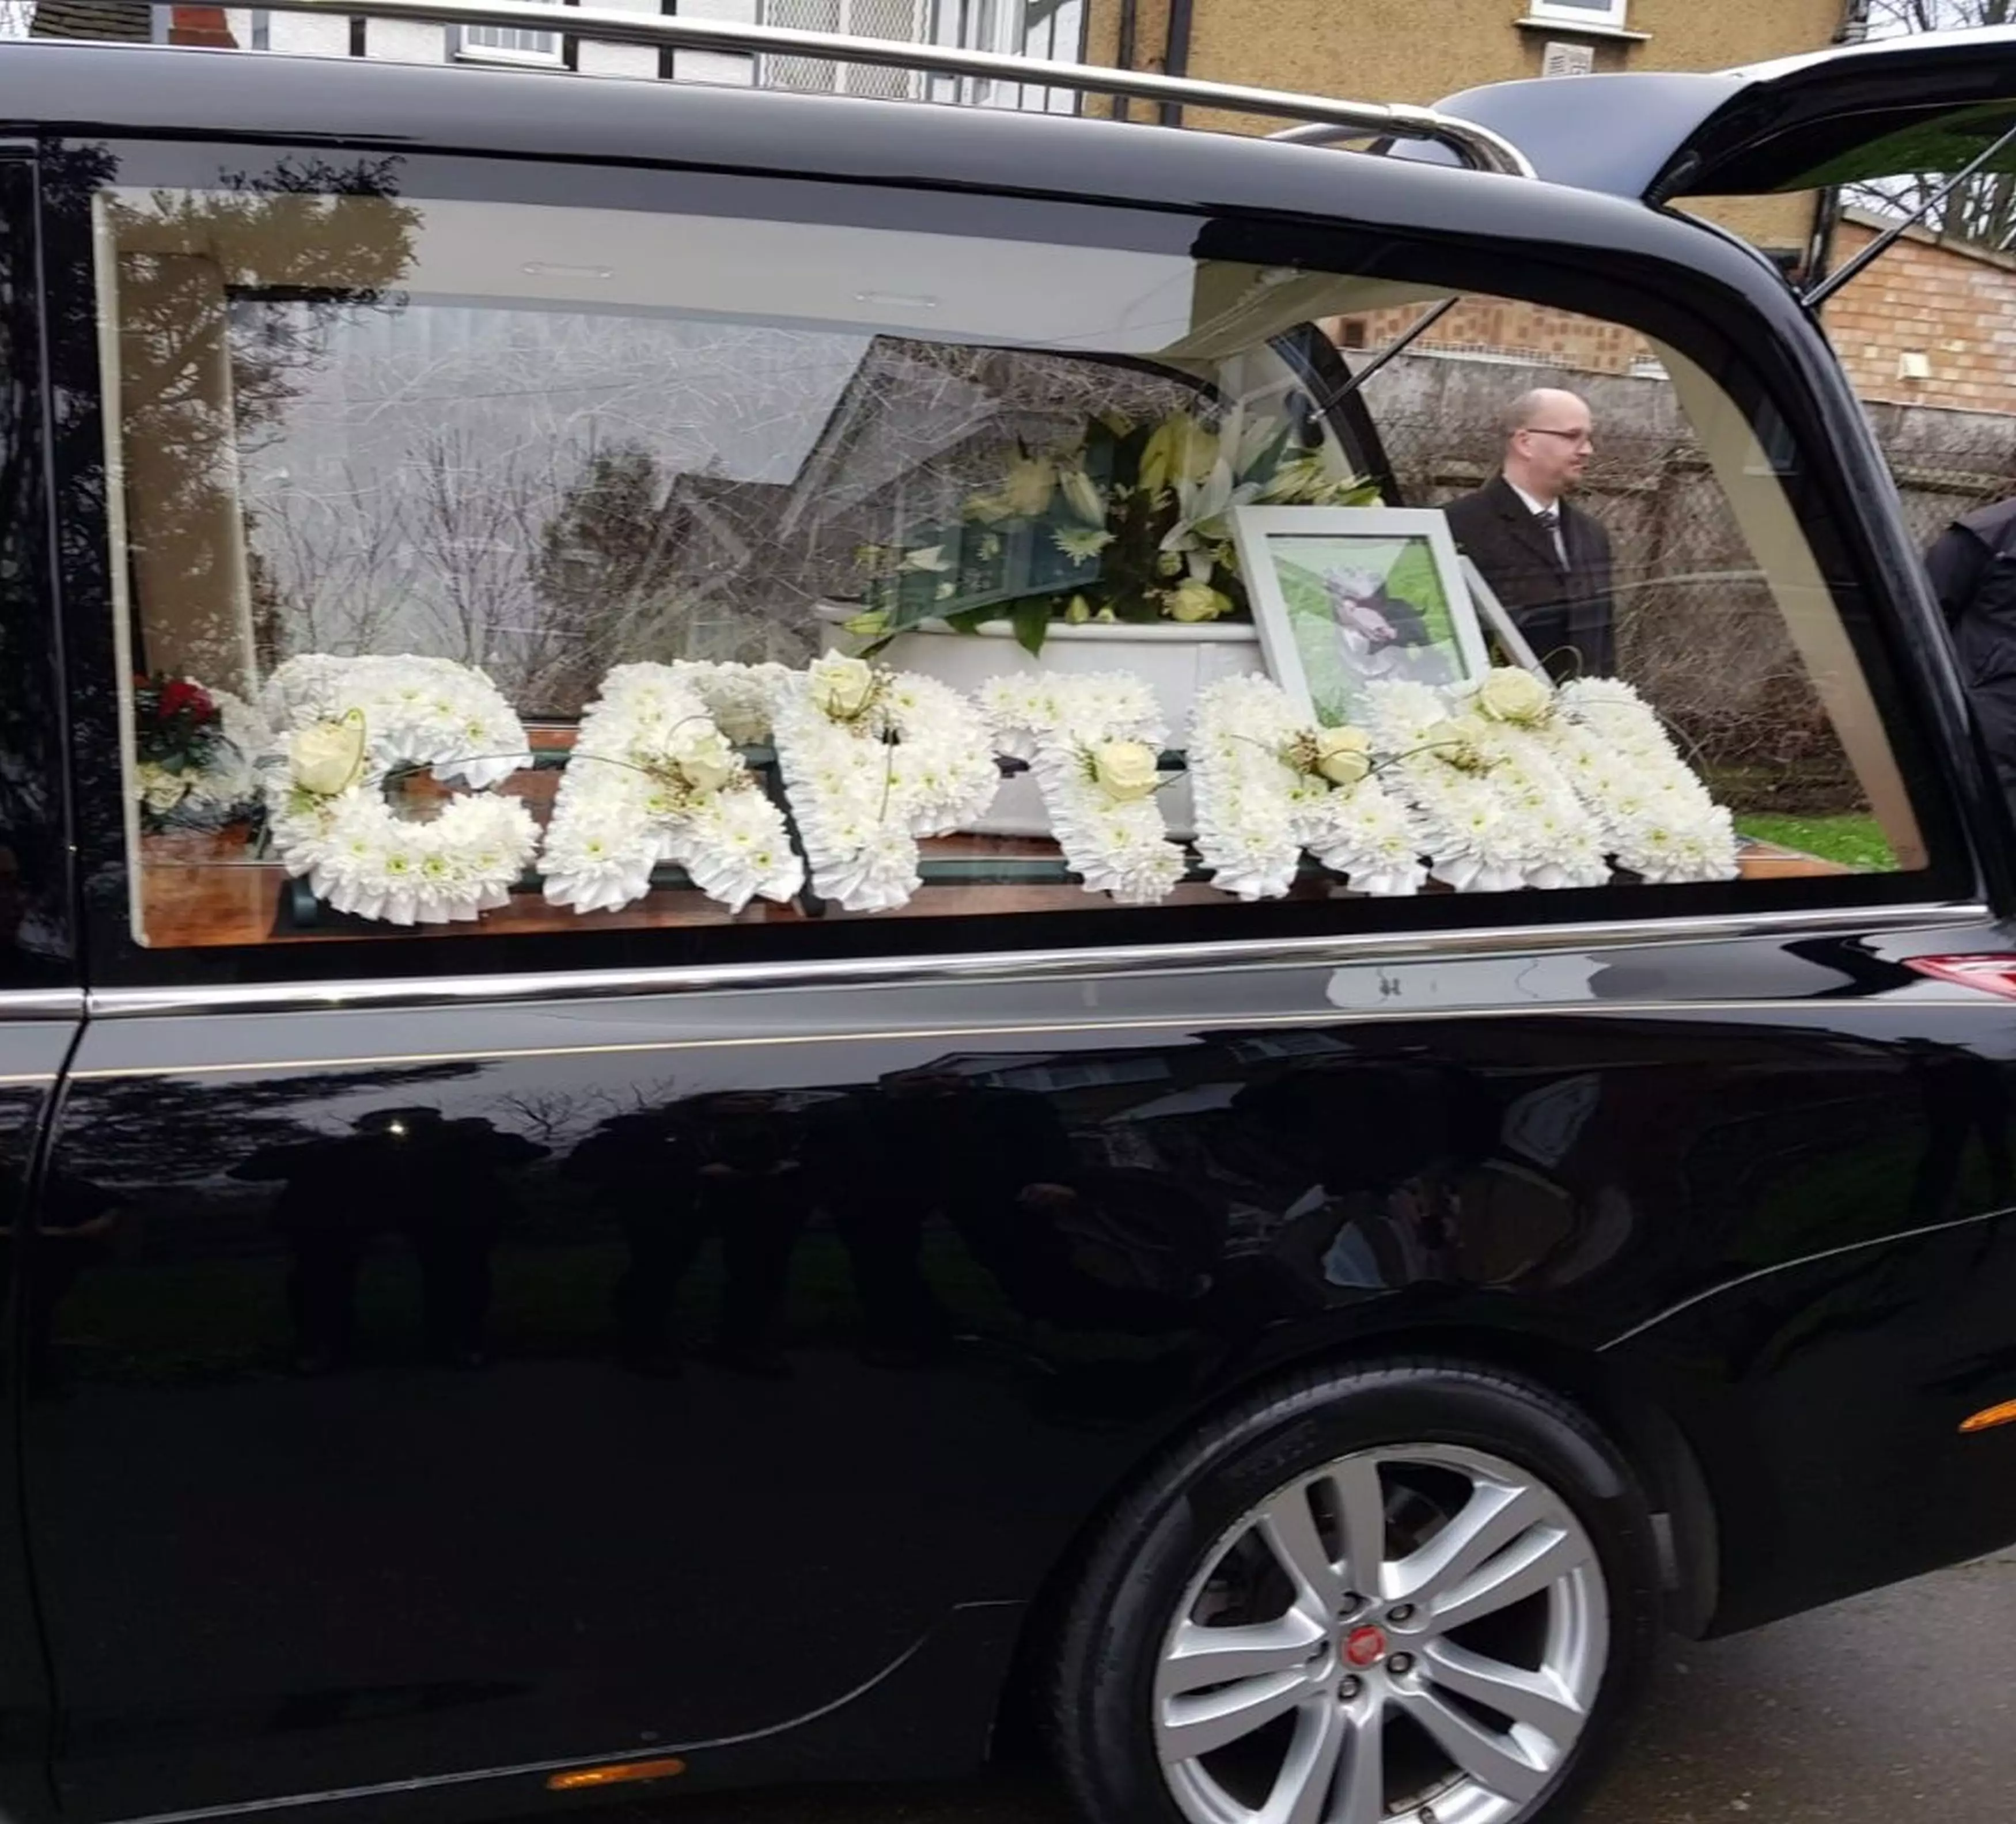 Some of the floral tributes with the coffin in the limousine.